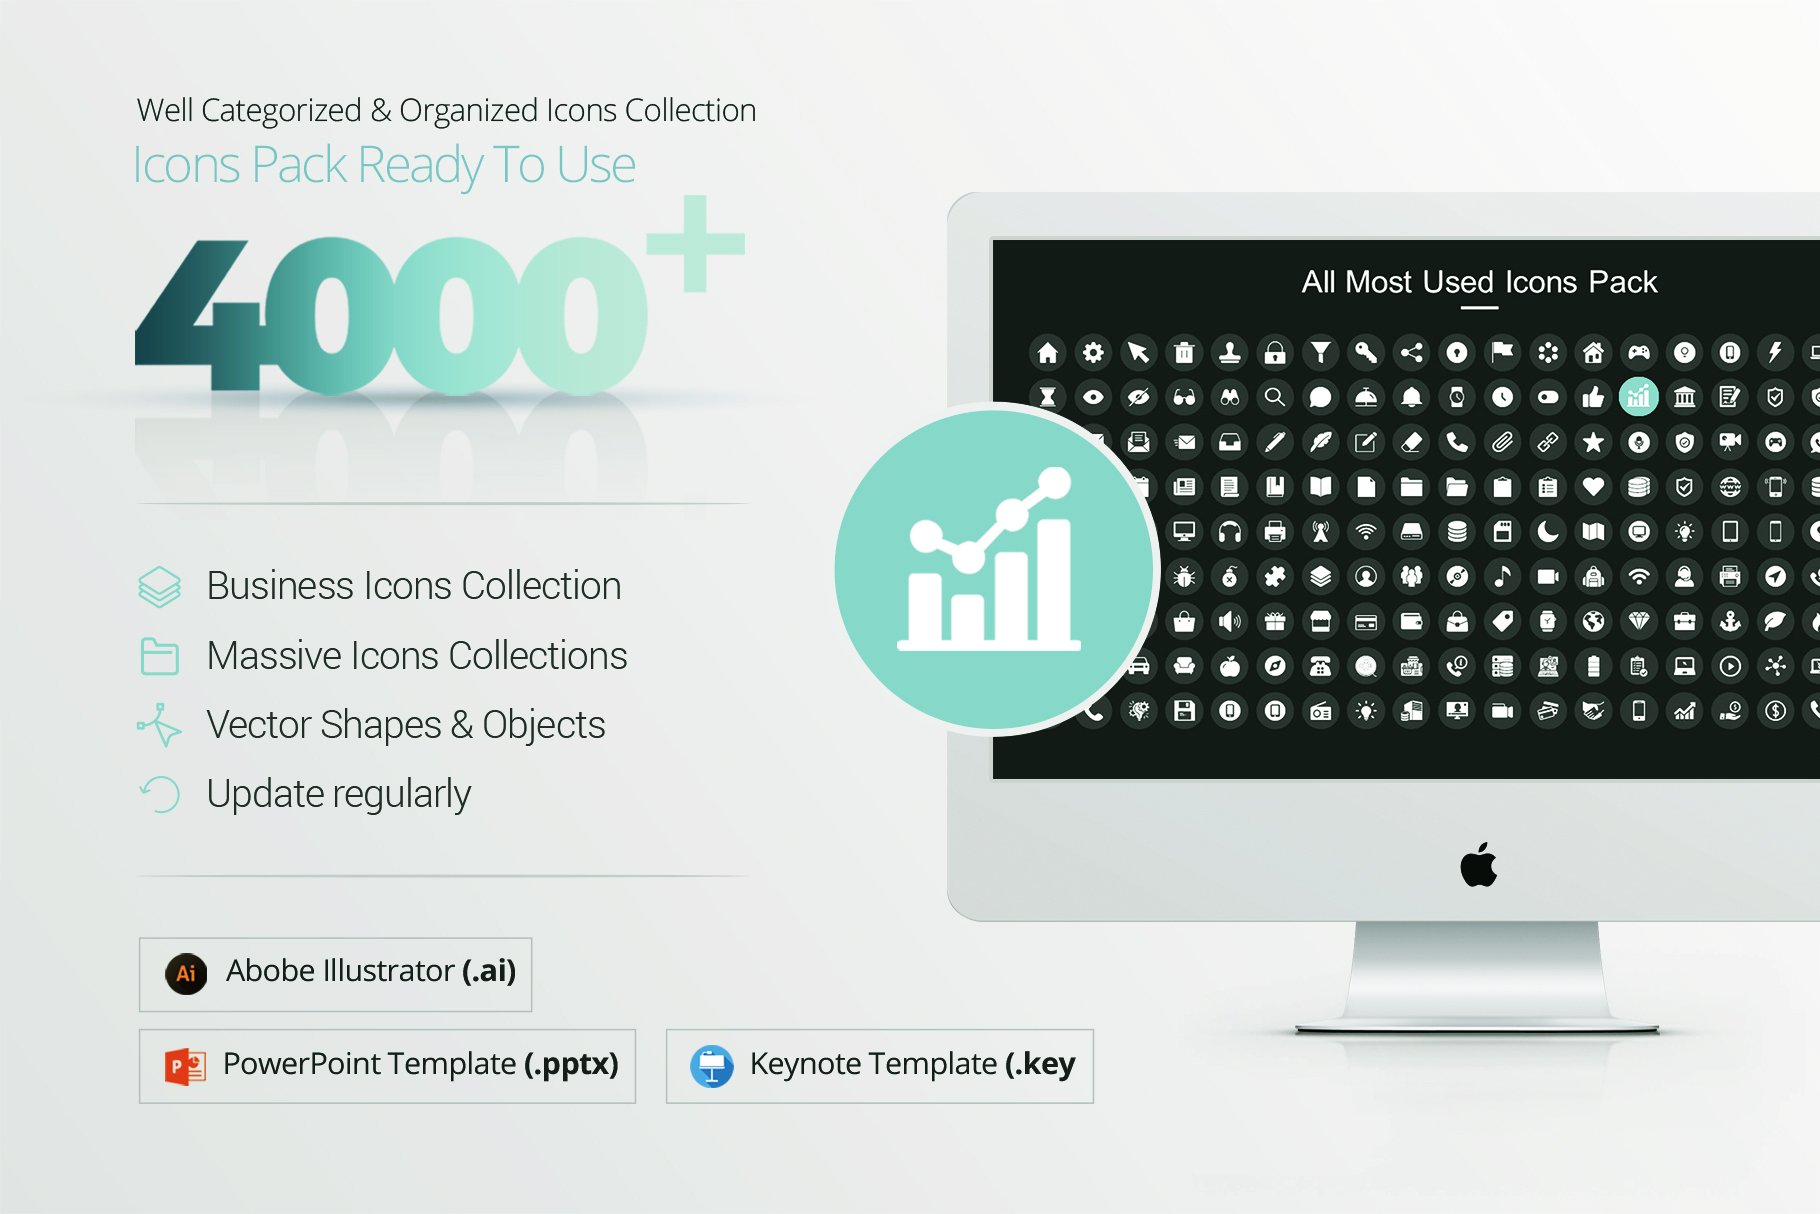 There are also thematic icons that you can use in your presentation.